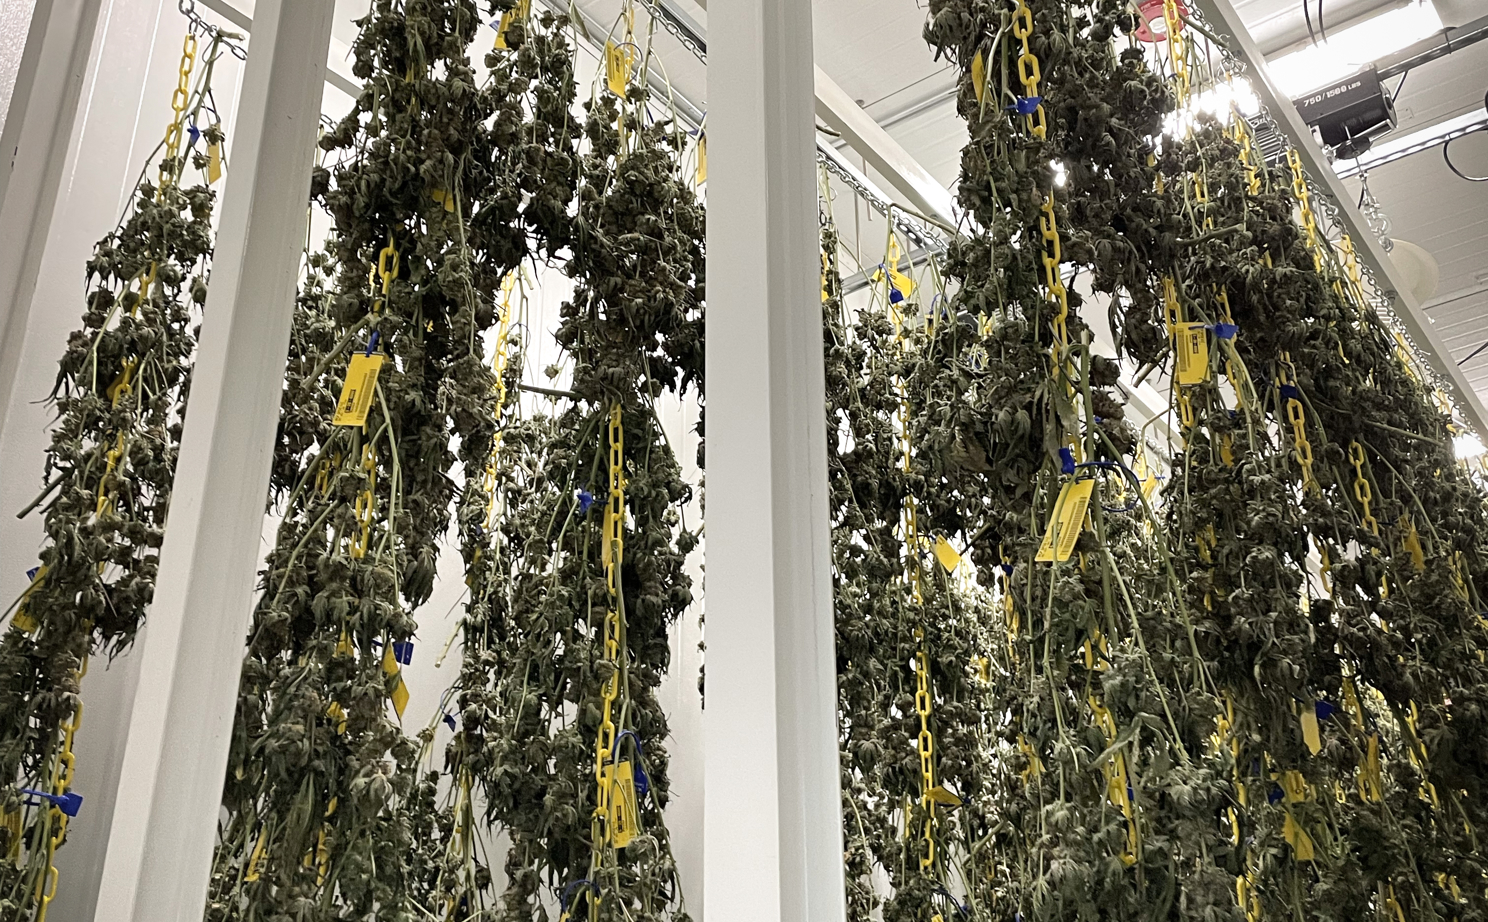 Dry Room for Cannabis Drying and Curing